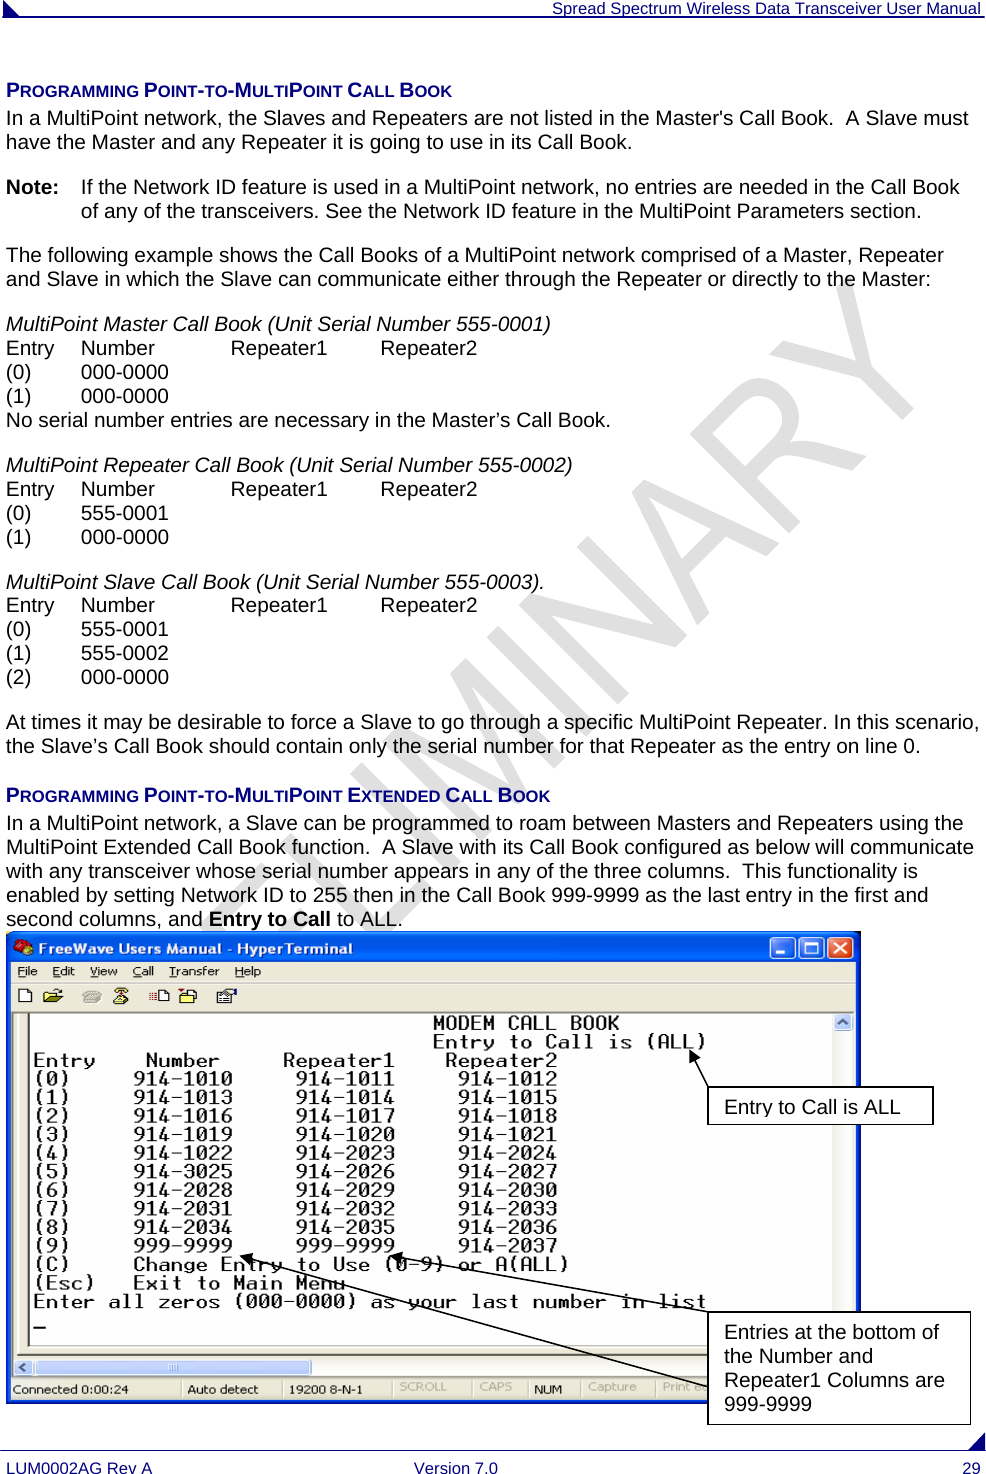  Spread Spectrum Wireless Data Transceiver User Manual LUM0002AG Rev A  Version 7.0  29 PROGRAMMING POINT-TO-MULTIPOINT CALL BOOK  In a MultiPoint network, the Slaves and Repeaters are not listed in the Master&apos;s Call Book.  A Slave must have the Master and any Repeater it is going to use in its Call Book.   Note:   If the Network ID feature is used in a MultiPoint network, no entries are needed in the Call Book of any of the transceivers. See the Network ID feature in the MultiPoint Parameters section. The following example shows the Call Books of a MultiPoint network comprised of a Master, Repeater and Slave in which the Slave can communicate either through the Repeater or directly to the Master: MultiPoint Master Call Book (Unit Serial Number 555-0001)                                                                   Entry   Number   Repeater1   Repeater2                                                                                          (0)  000-0000                                                                                                                                        (1)   000-0000                                                                                                                                        No serial number entries are necessary in the Master’s Call Book.  MultiPoint Repeater Call Book (Unit Serial Number 555-0002)                                                                       Entry   Number   Repeater1   Repeater2                                                                                   (0)   555-0001                                                                                                                                        (1)   000-0000 MultiPoint Slave Call Book (Unit Serial Number 555-0003).                                                                     Entry   Number   Repeater1   Repeater2                                                                                   (0)   555-0001                                                                                                                                         (1)   555-0002                                                                                                                                        (2)   000-0000 At times it may be desirable to force a Slave to go through a specific MultiPoint Repeater. In this scenario, the Slave’s Call Book should contain only the serial number for that Repeater as the entry on line 0. PROGRAMMING POINT-TO-MULTIPOINT EXTENDED CALL BOOK In a MultiPoint network, a Slave can be programmed to roam between Masters and Repeaters using the MultiPoint Extended Call Book function.  A Slave with its Call Book configured as below will communicate with any transceiver whose serial number appears in any of the three columns.  This functionality is enabled by setting Network ID to 255 then in the Call Book 999-9999 as the last entry in the first and second columns, and Entry to Call to ALL.  Entry to Call is ALLEntries at the bottom of the Number and Repeater1 Columns are 999-9999 